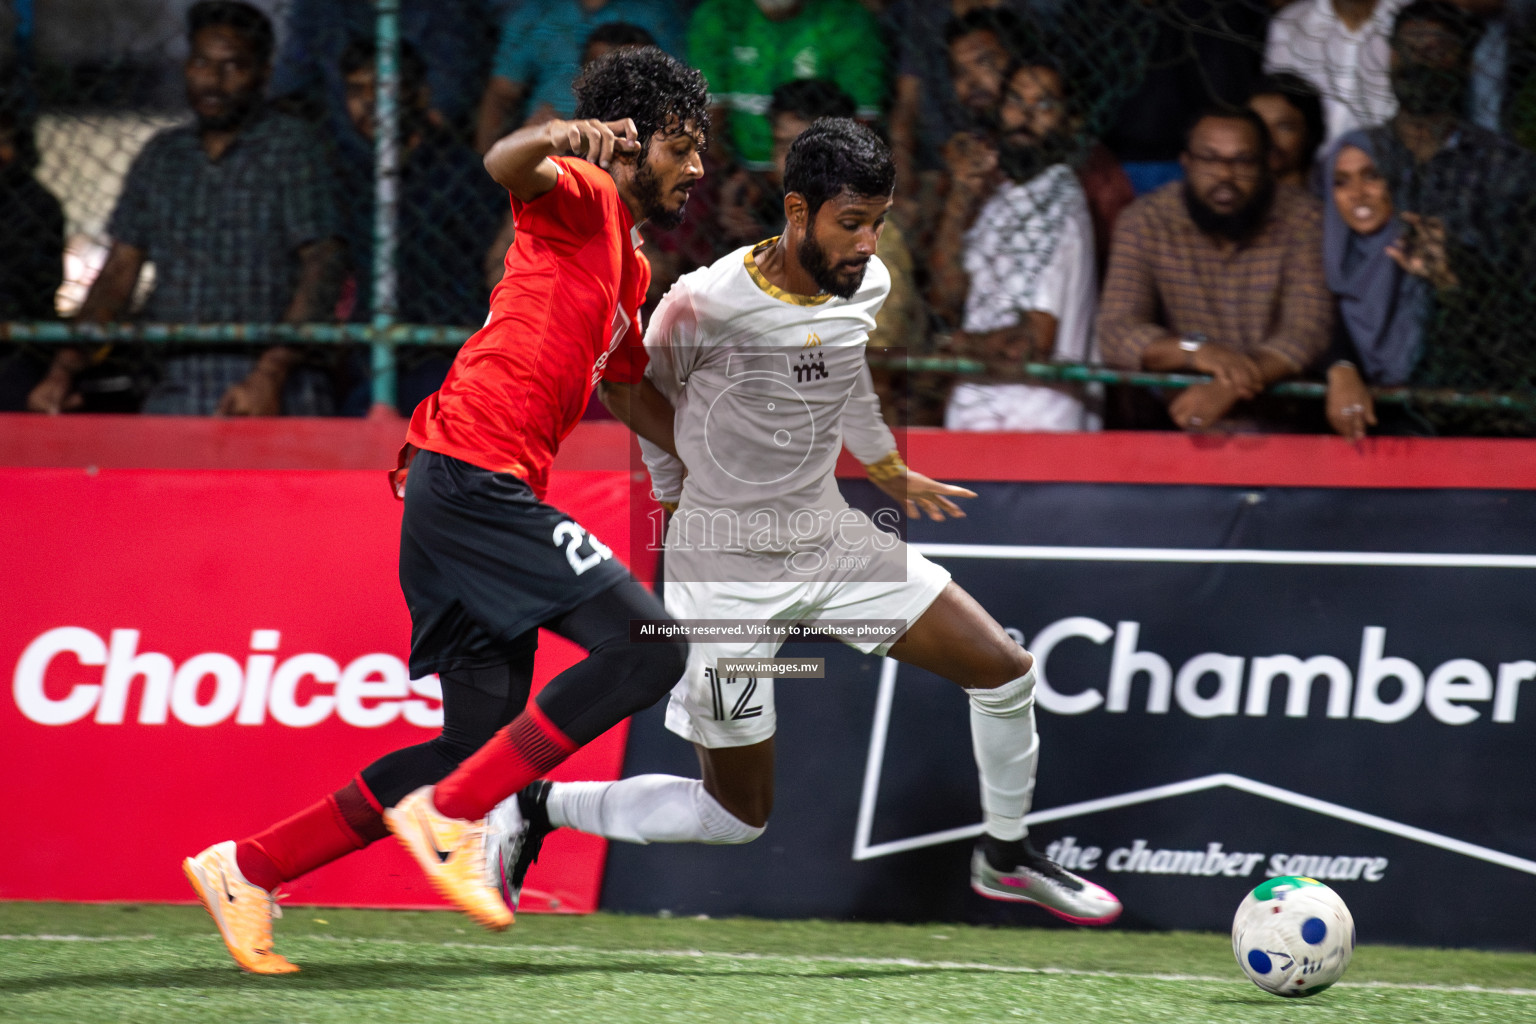 MPL vs United BML in Club Maldives Cup 2023 held in Hulhumale, Maldives, on Thursday, 04th August 2023 
Photos: Mohamed Mahfooz Moosa / images.mv